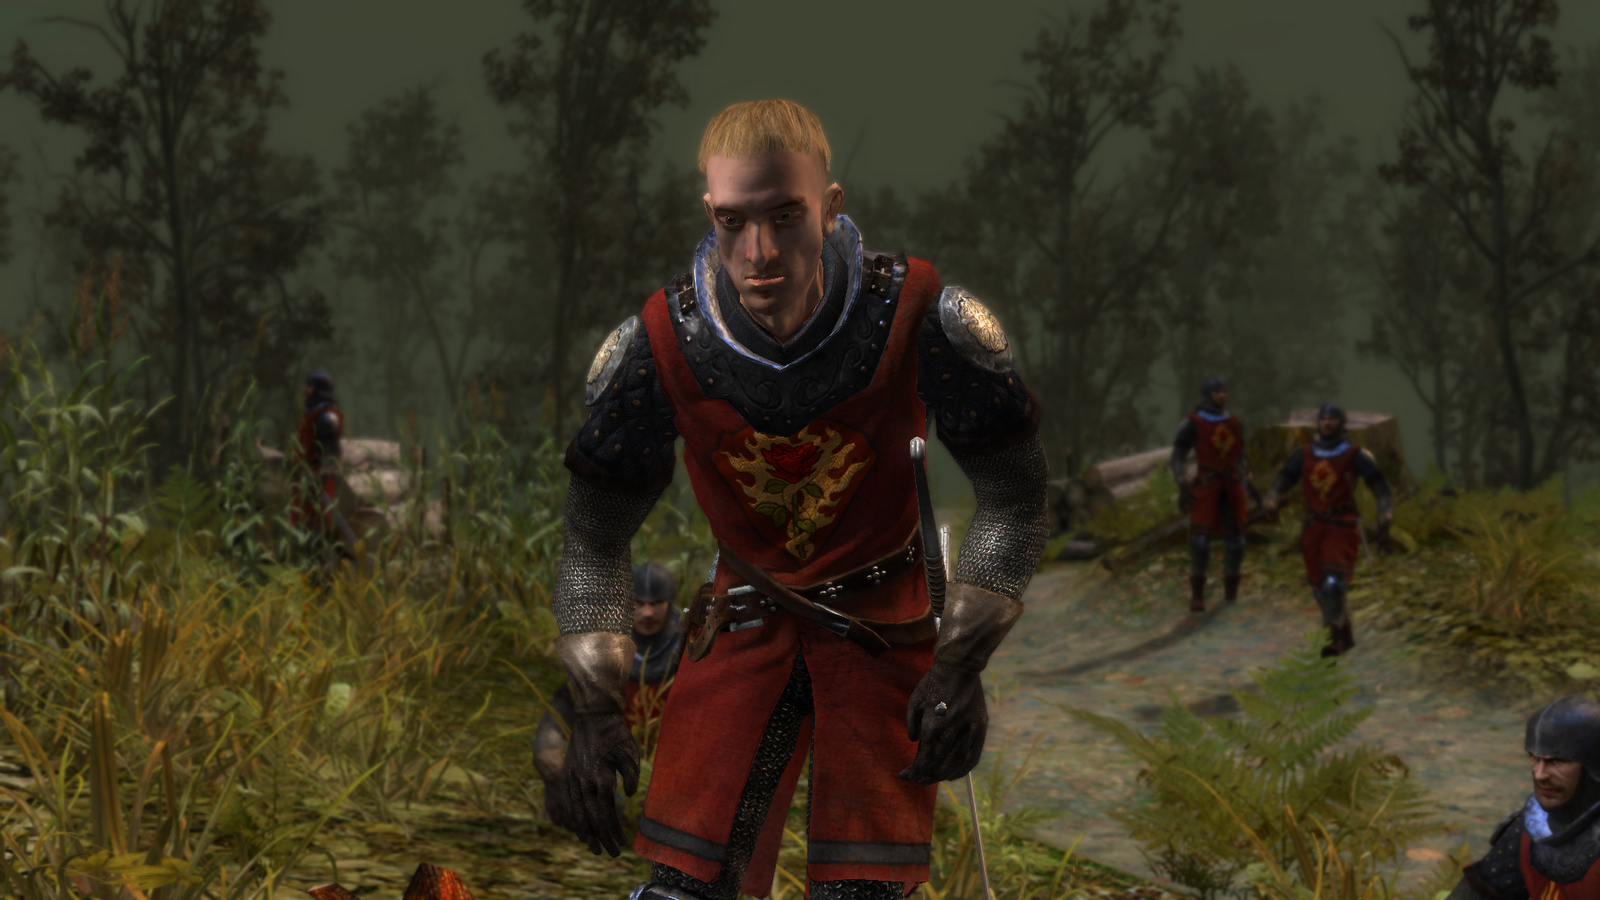 The Witcher, Siegfried in the Swamp